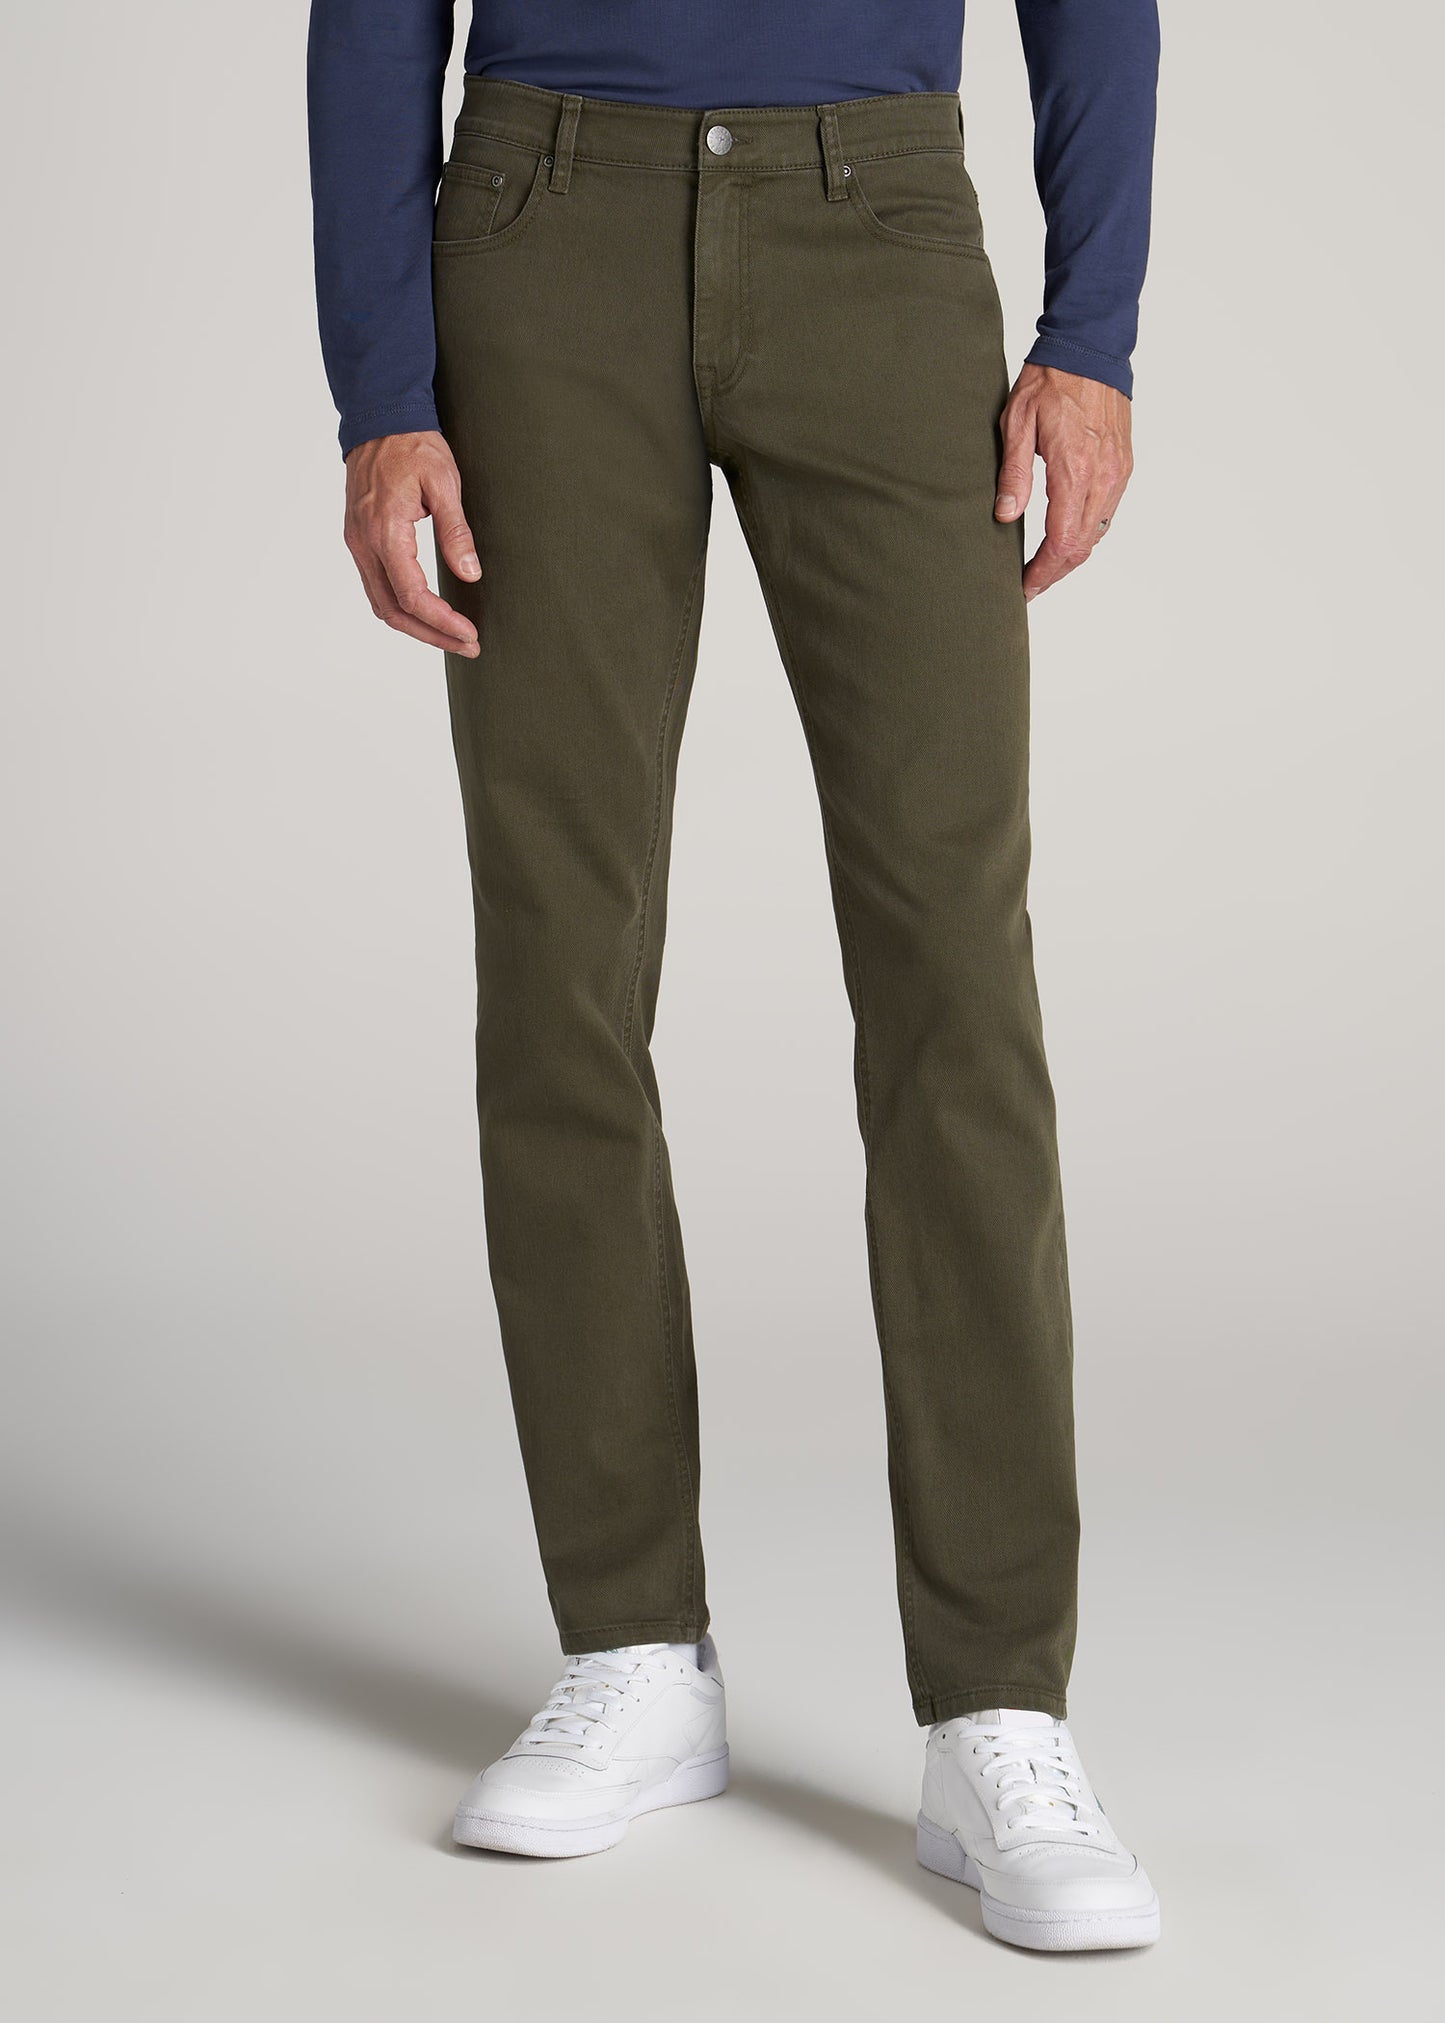       American-Tall-Men-Carman-Tapered-Fit-Jeans-Olive-Green-Wash-front